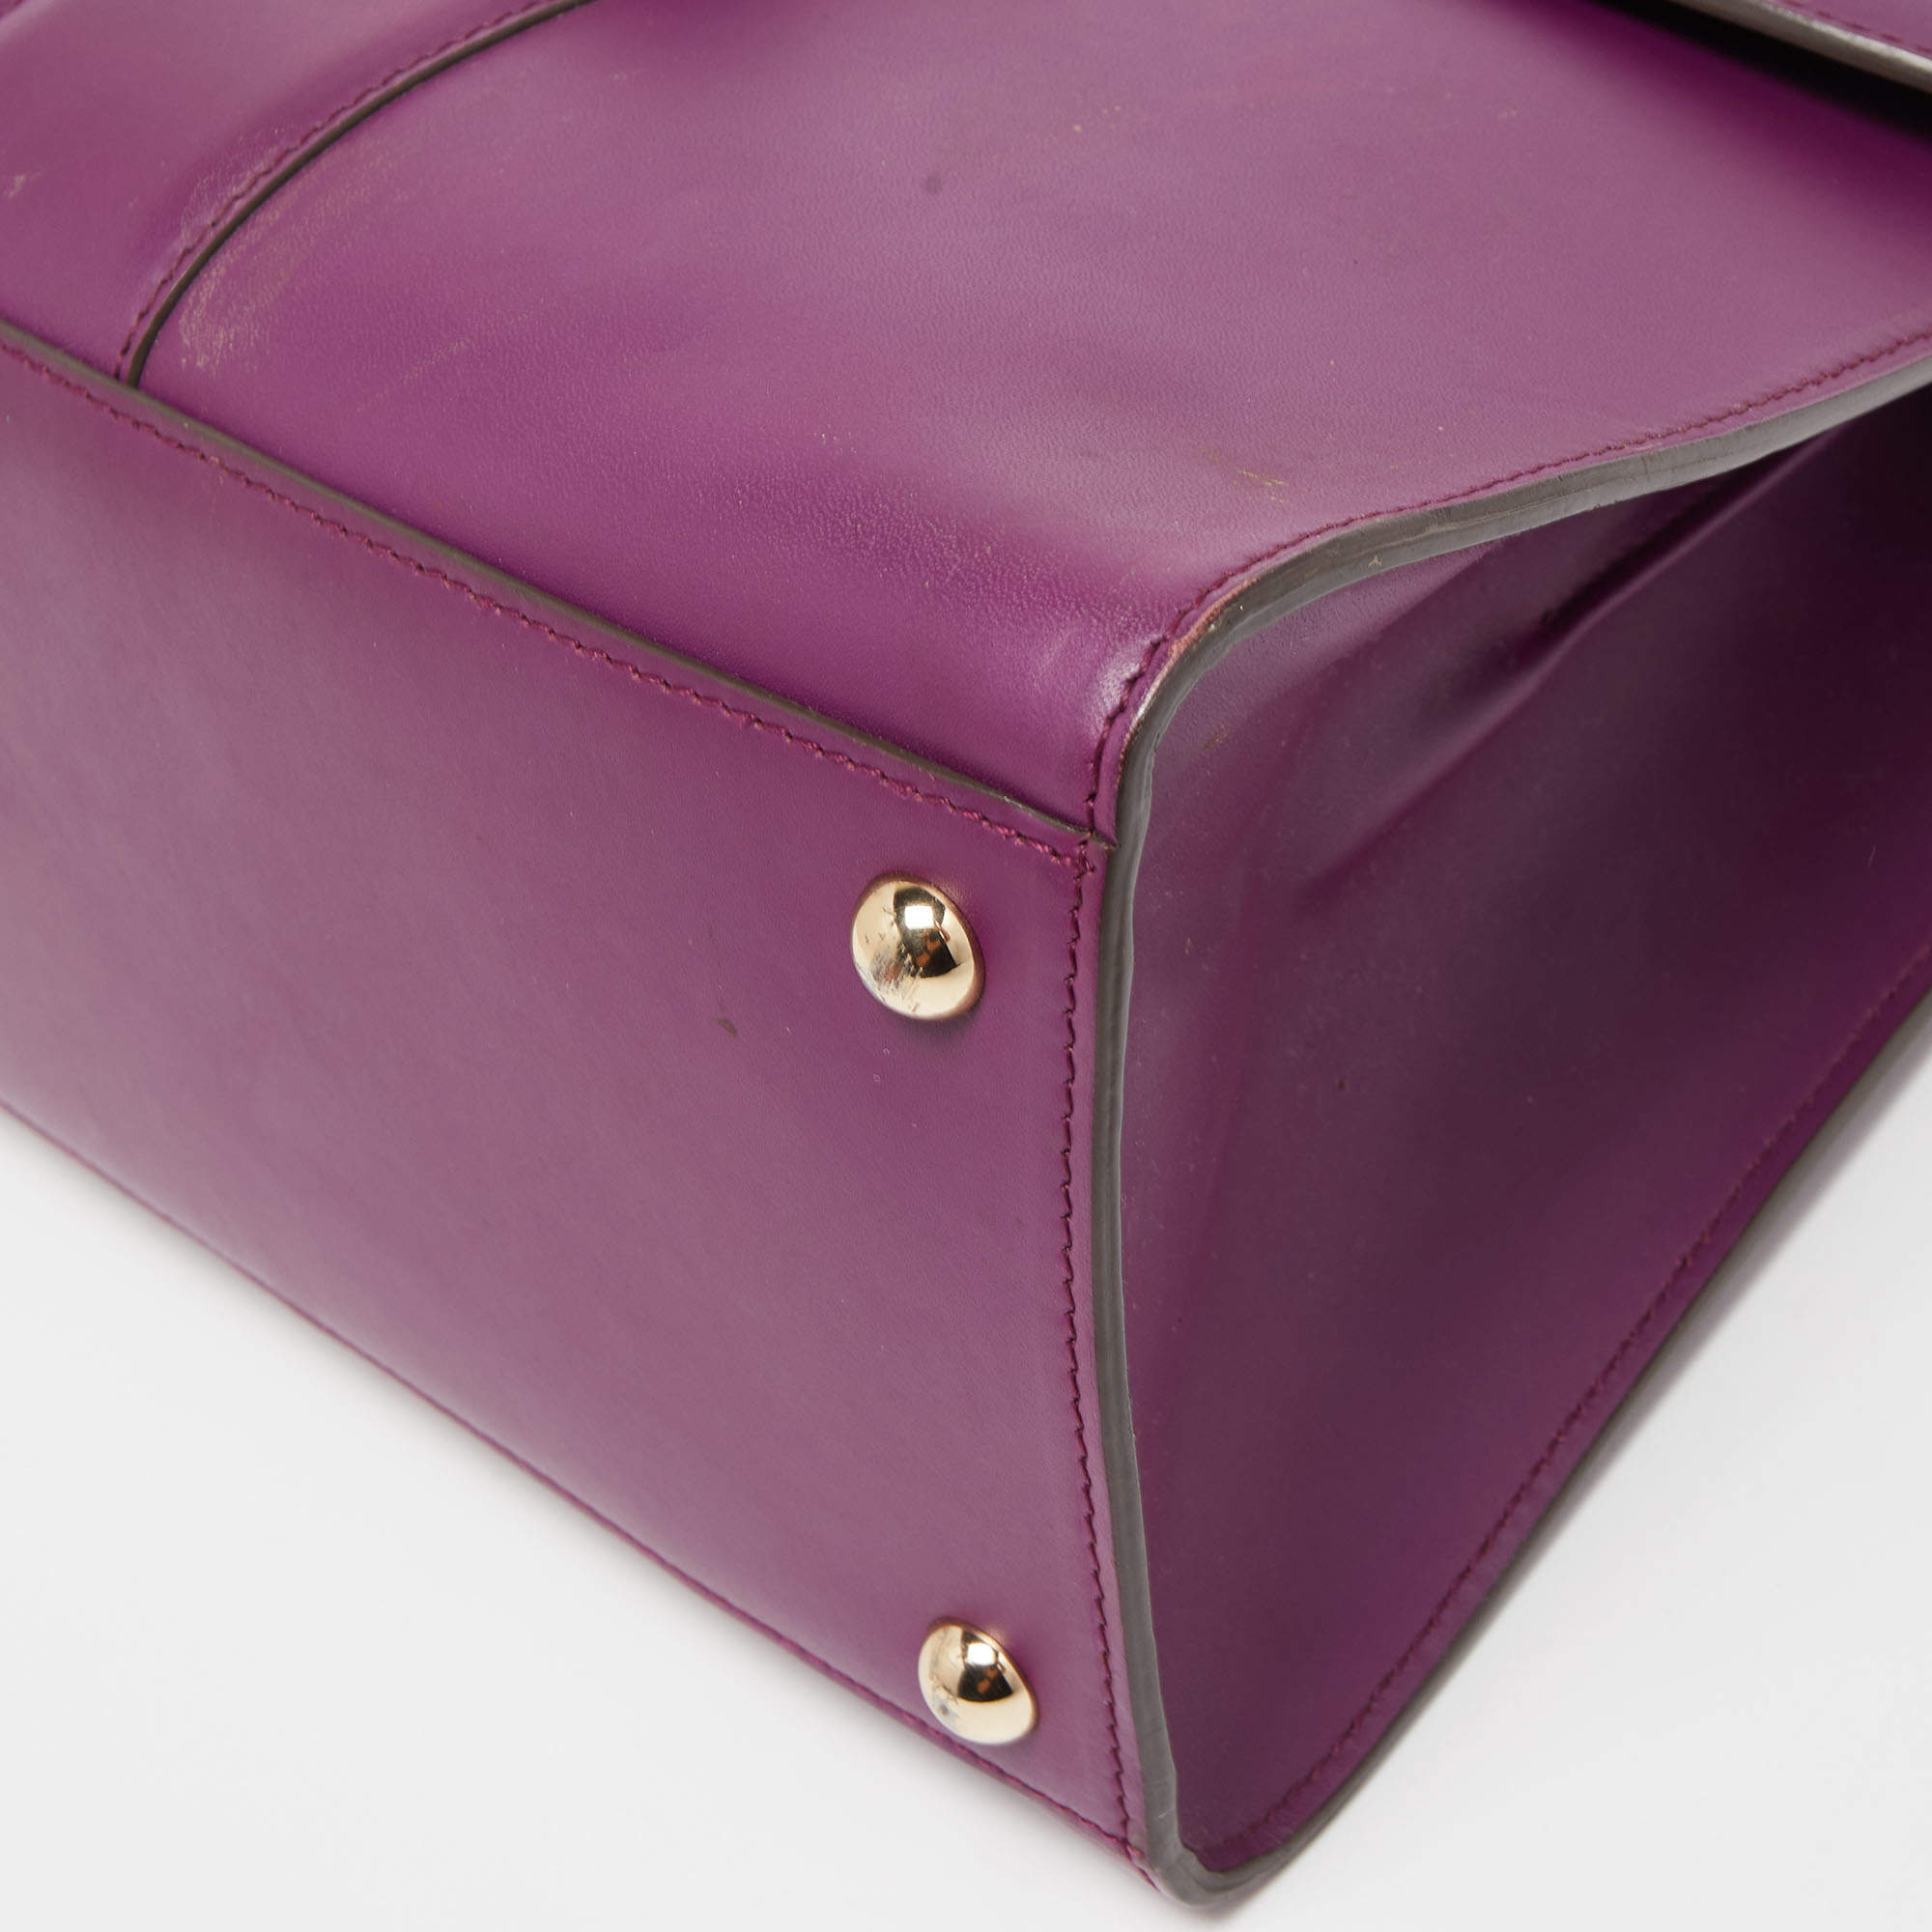 Delvaux - Authenticated Purse - Leather Purple Plain for Women, Very Good Condition